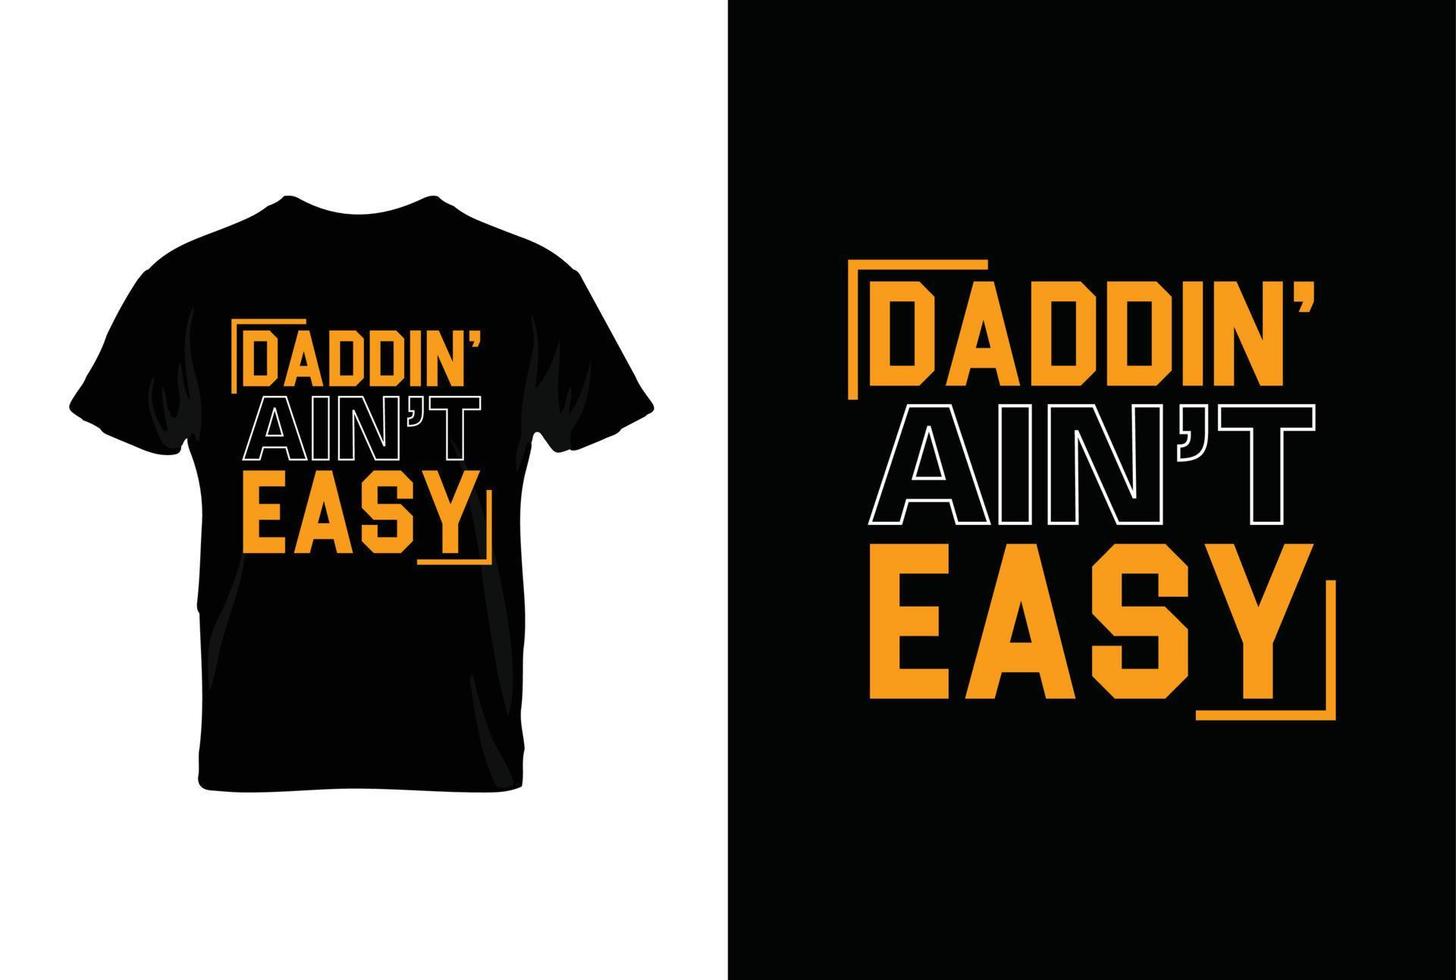 Dad din Ain't Easy. Typography vector father's quote t-shirt design